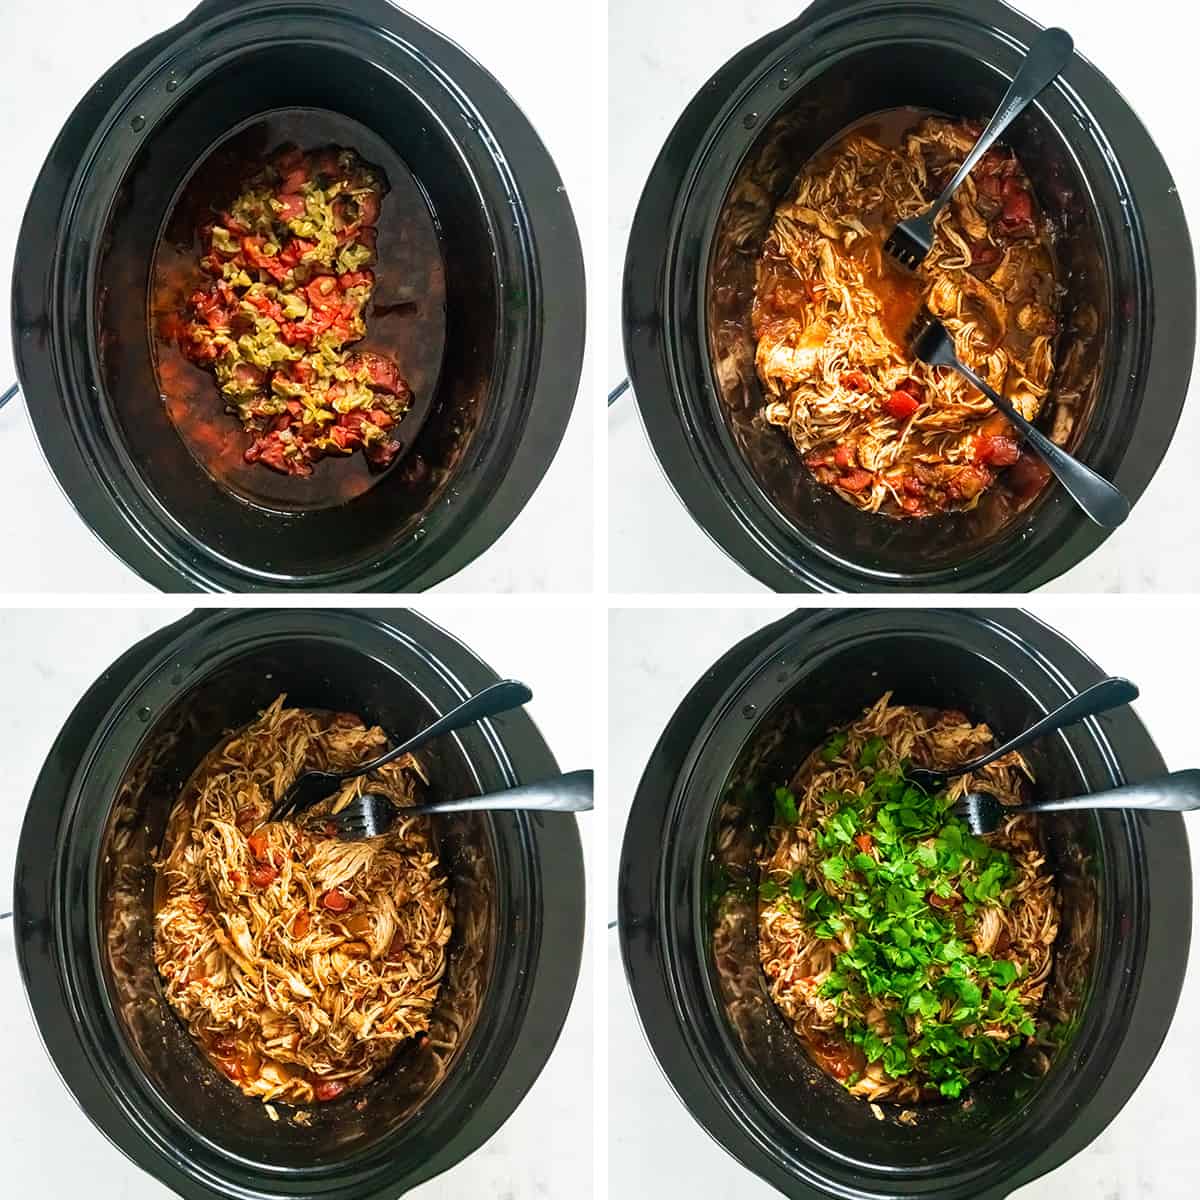 Four images of forks shredding cooked chicken in a crock pot and cilantro on top.